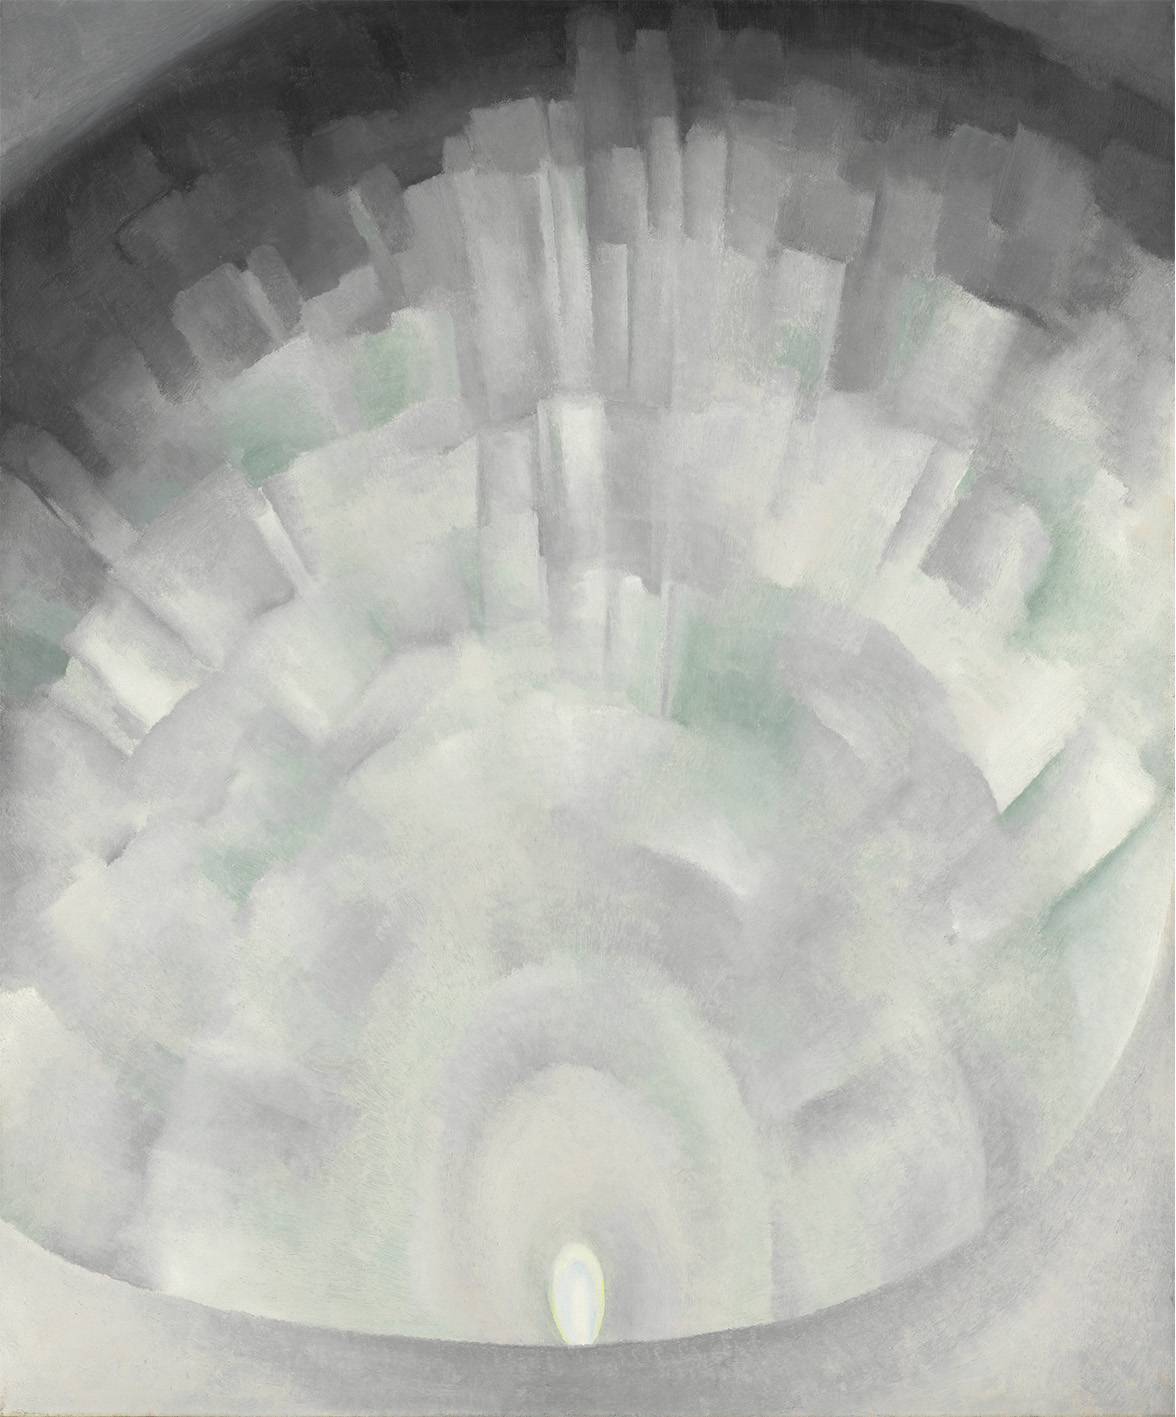 Georgia OKeeffe, Ballet Skirt or Electric Light (from the White Rose Motif), 1927, The Art Institute of Chicago (Alfred Stieglitz Collection, bequest of Georgia OKeeffe)